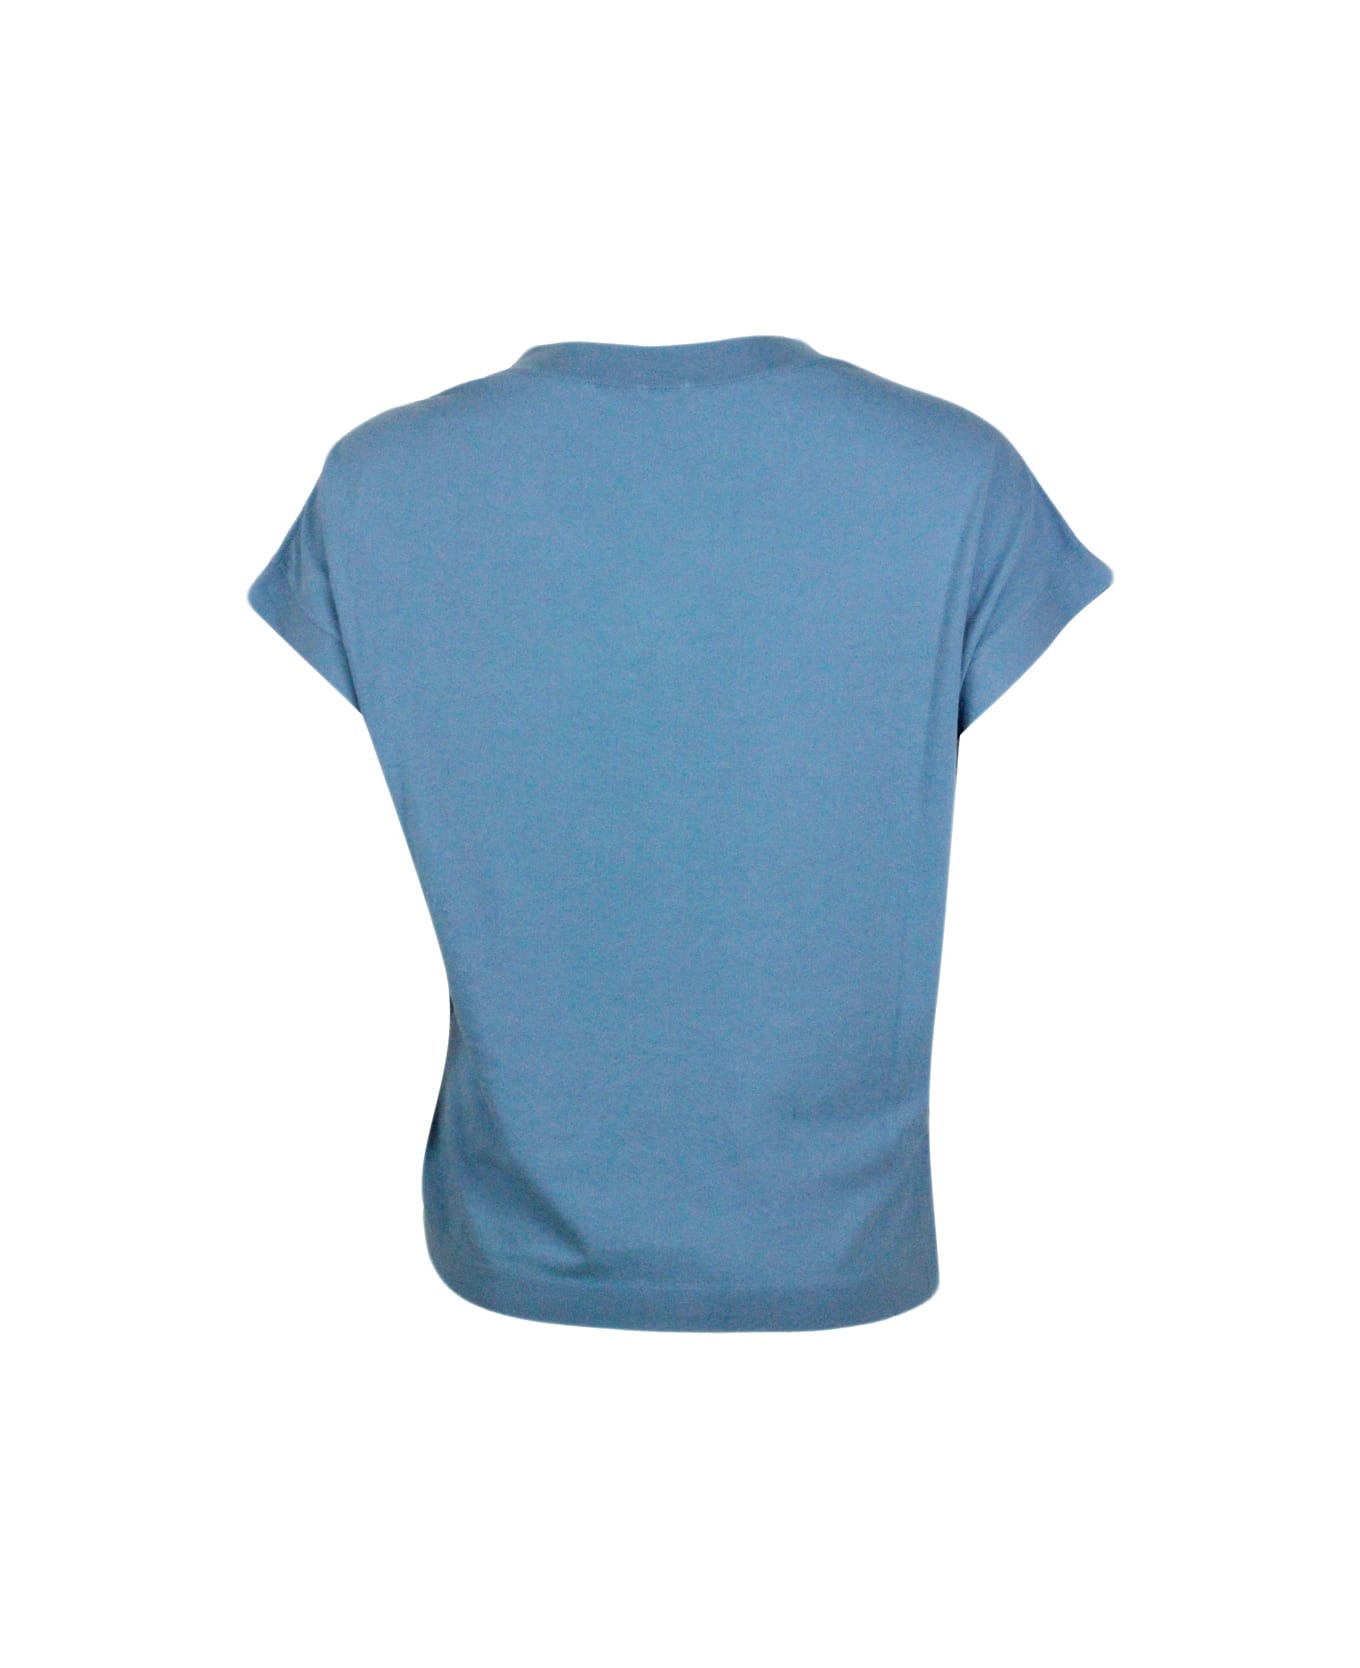 Malo Cotton Sweater With Sleeveless V-neck And Buttons On The Sides - Light Blu